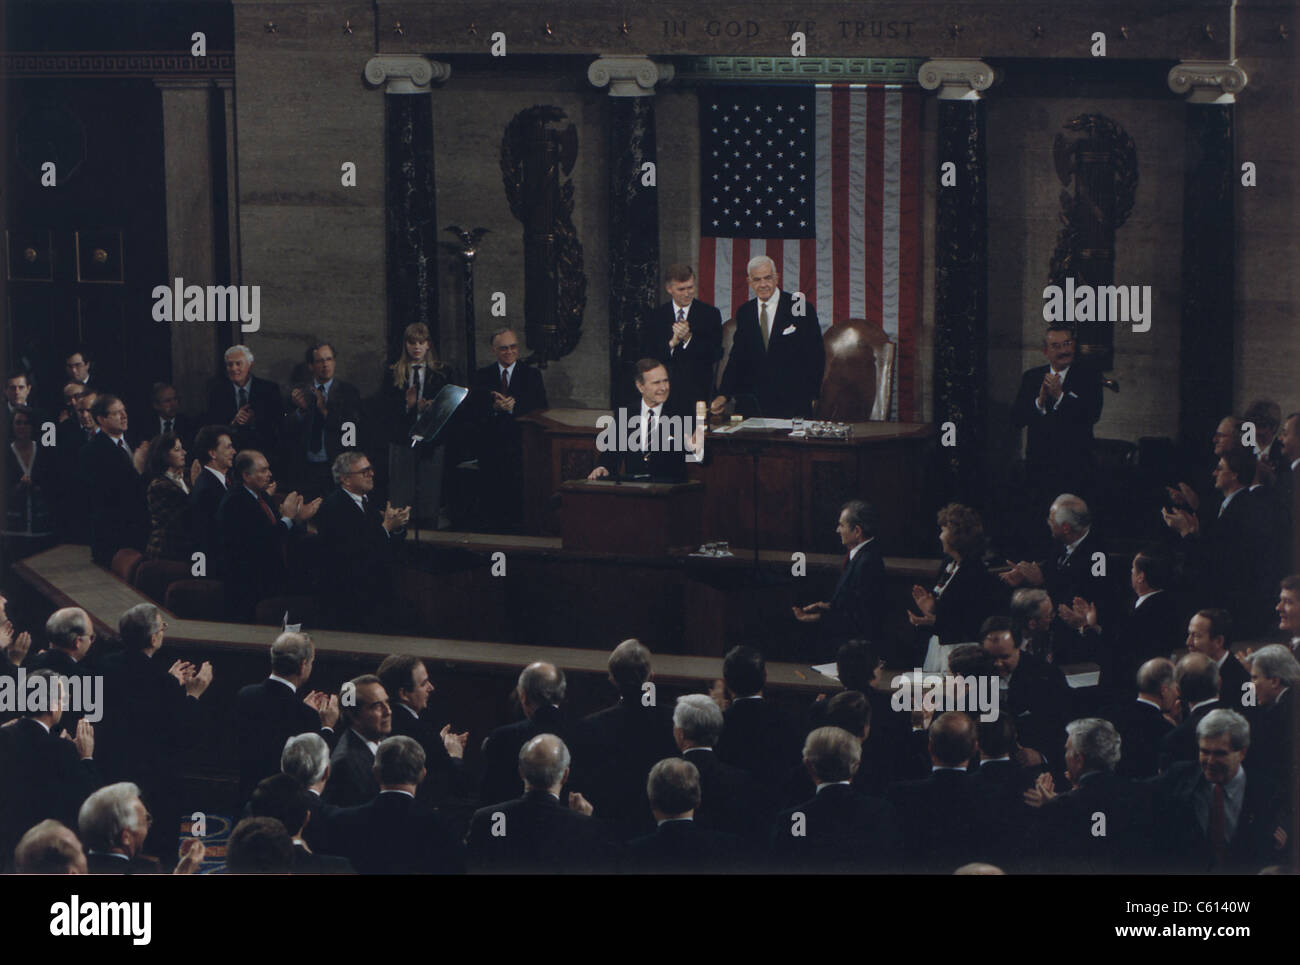 President Bush addresses a joint session of Congress regarding the end of the war with First Gulf War. The multi-national coalition completed their mission to drive Iraqi troops from Kuwait and did not pursue them into Iraq. Mar. 6 1991. (BSLOC 2011 3 86) Stock Photo